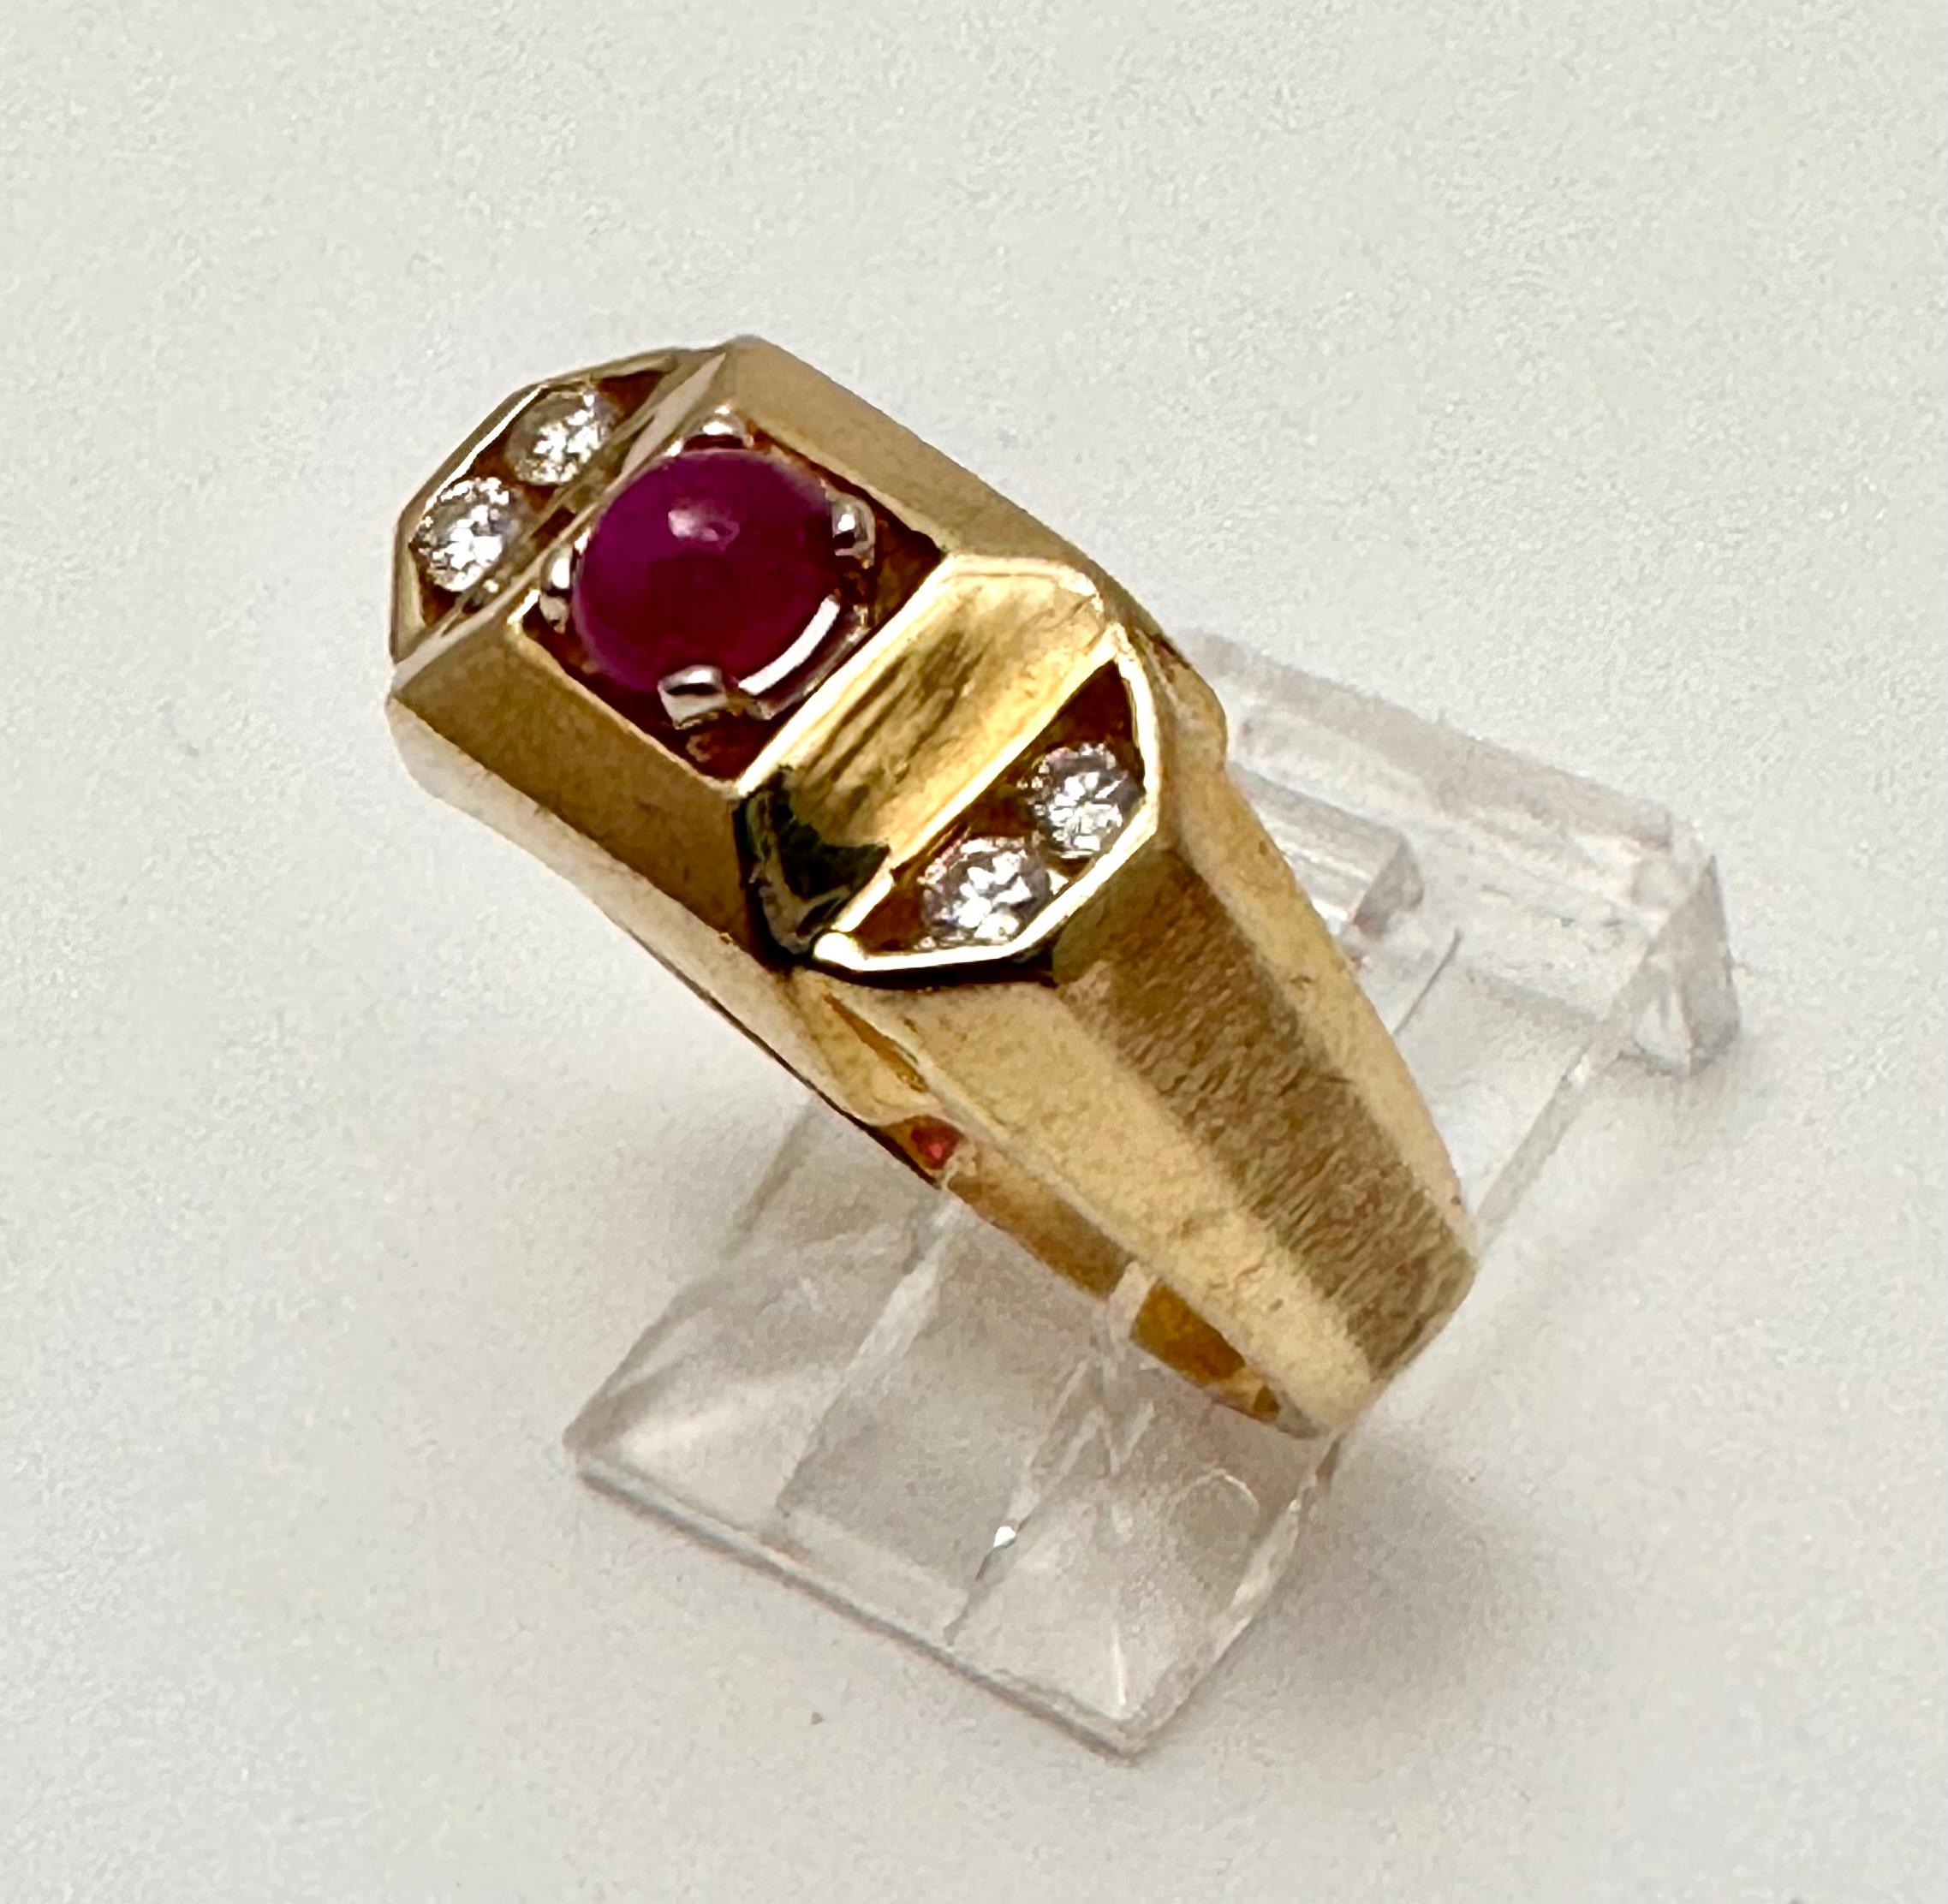 Round Cut 14k Yellow Gold 5mm Cabochon Ruby with 4 Round Diamonds Ring Size 9 1/2 For Sale